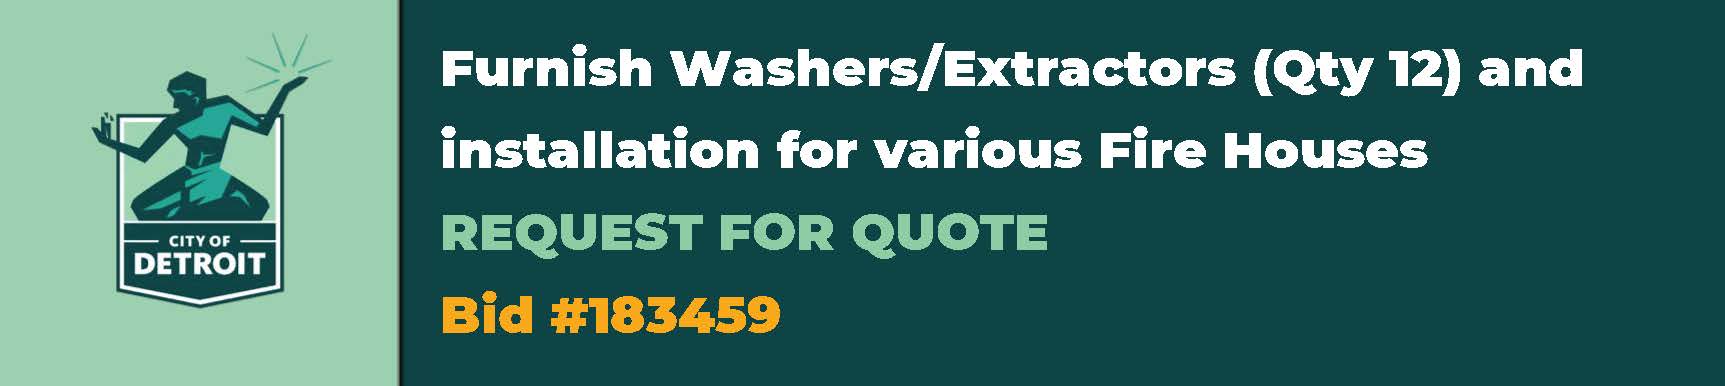 Furnish Washers/Extractors (Qty 12) and installation for various Fire Houses